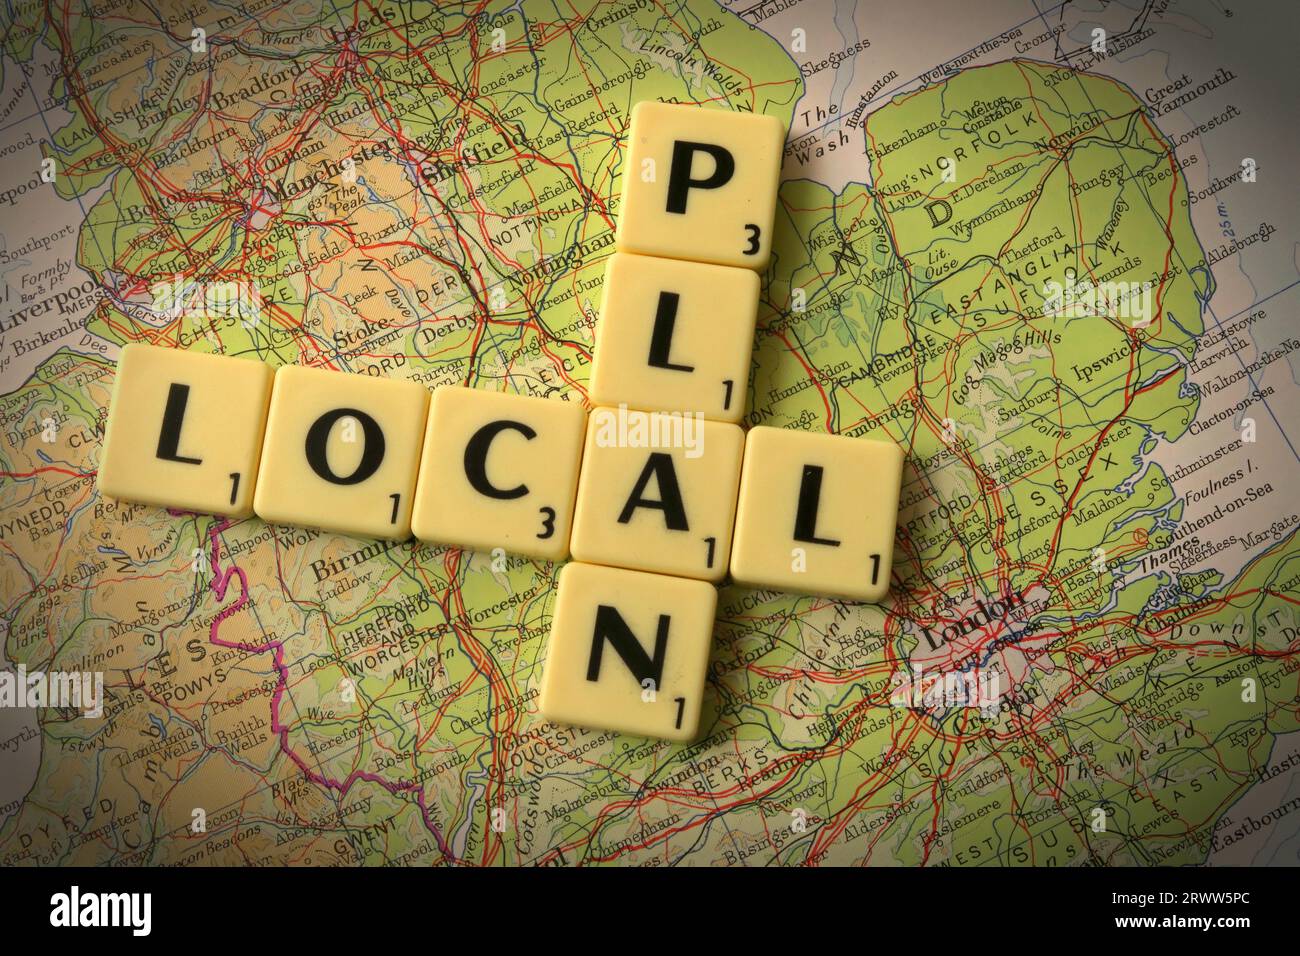 Local Plan spelled out in Scrabble letters and words on a map of England - local development and building control Stock Photo